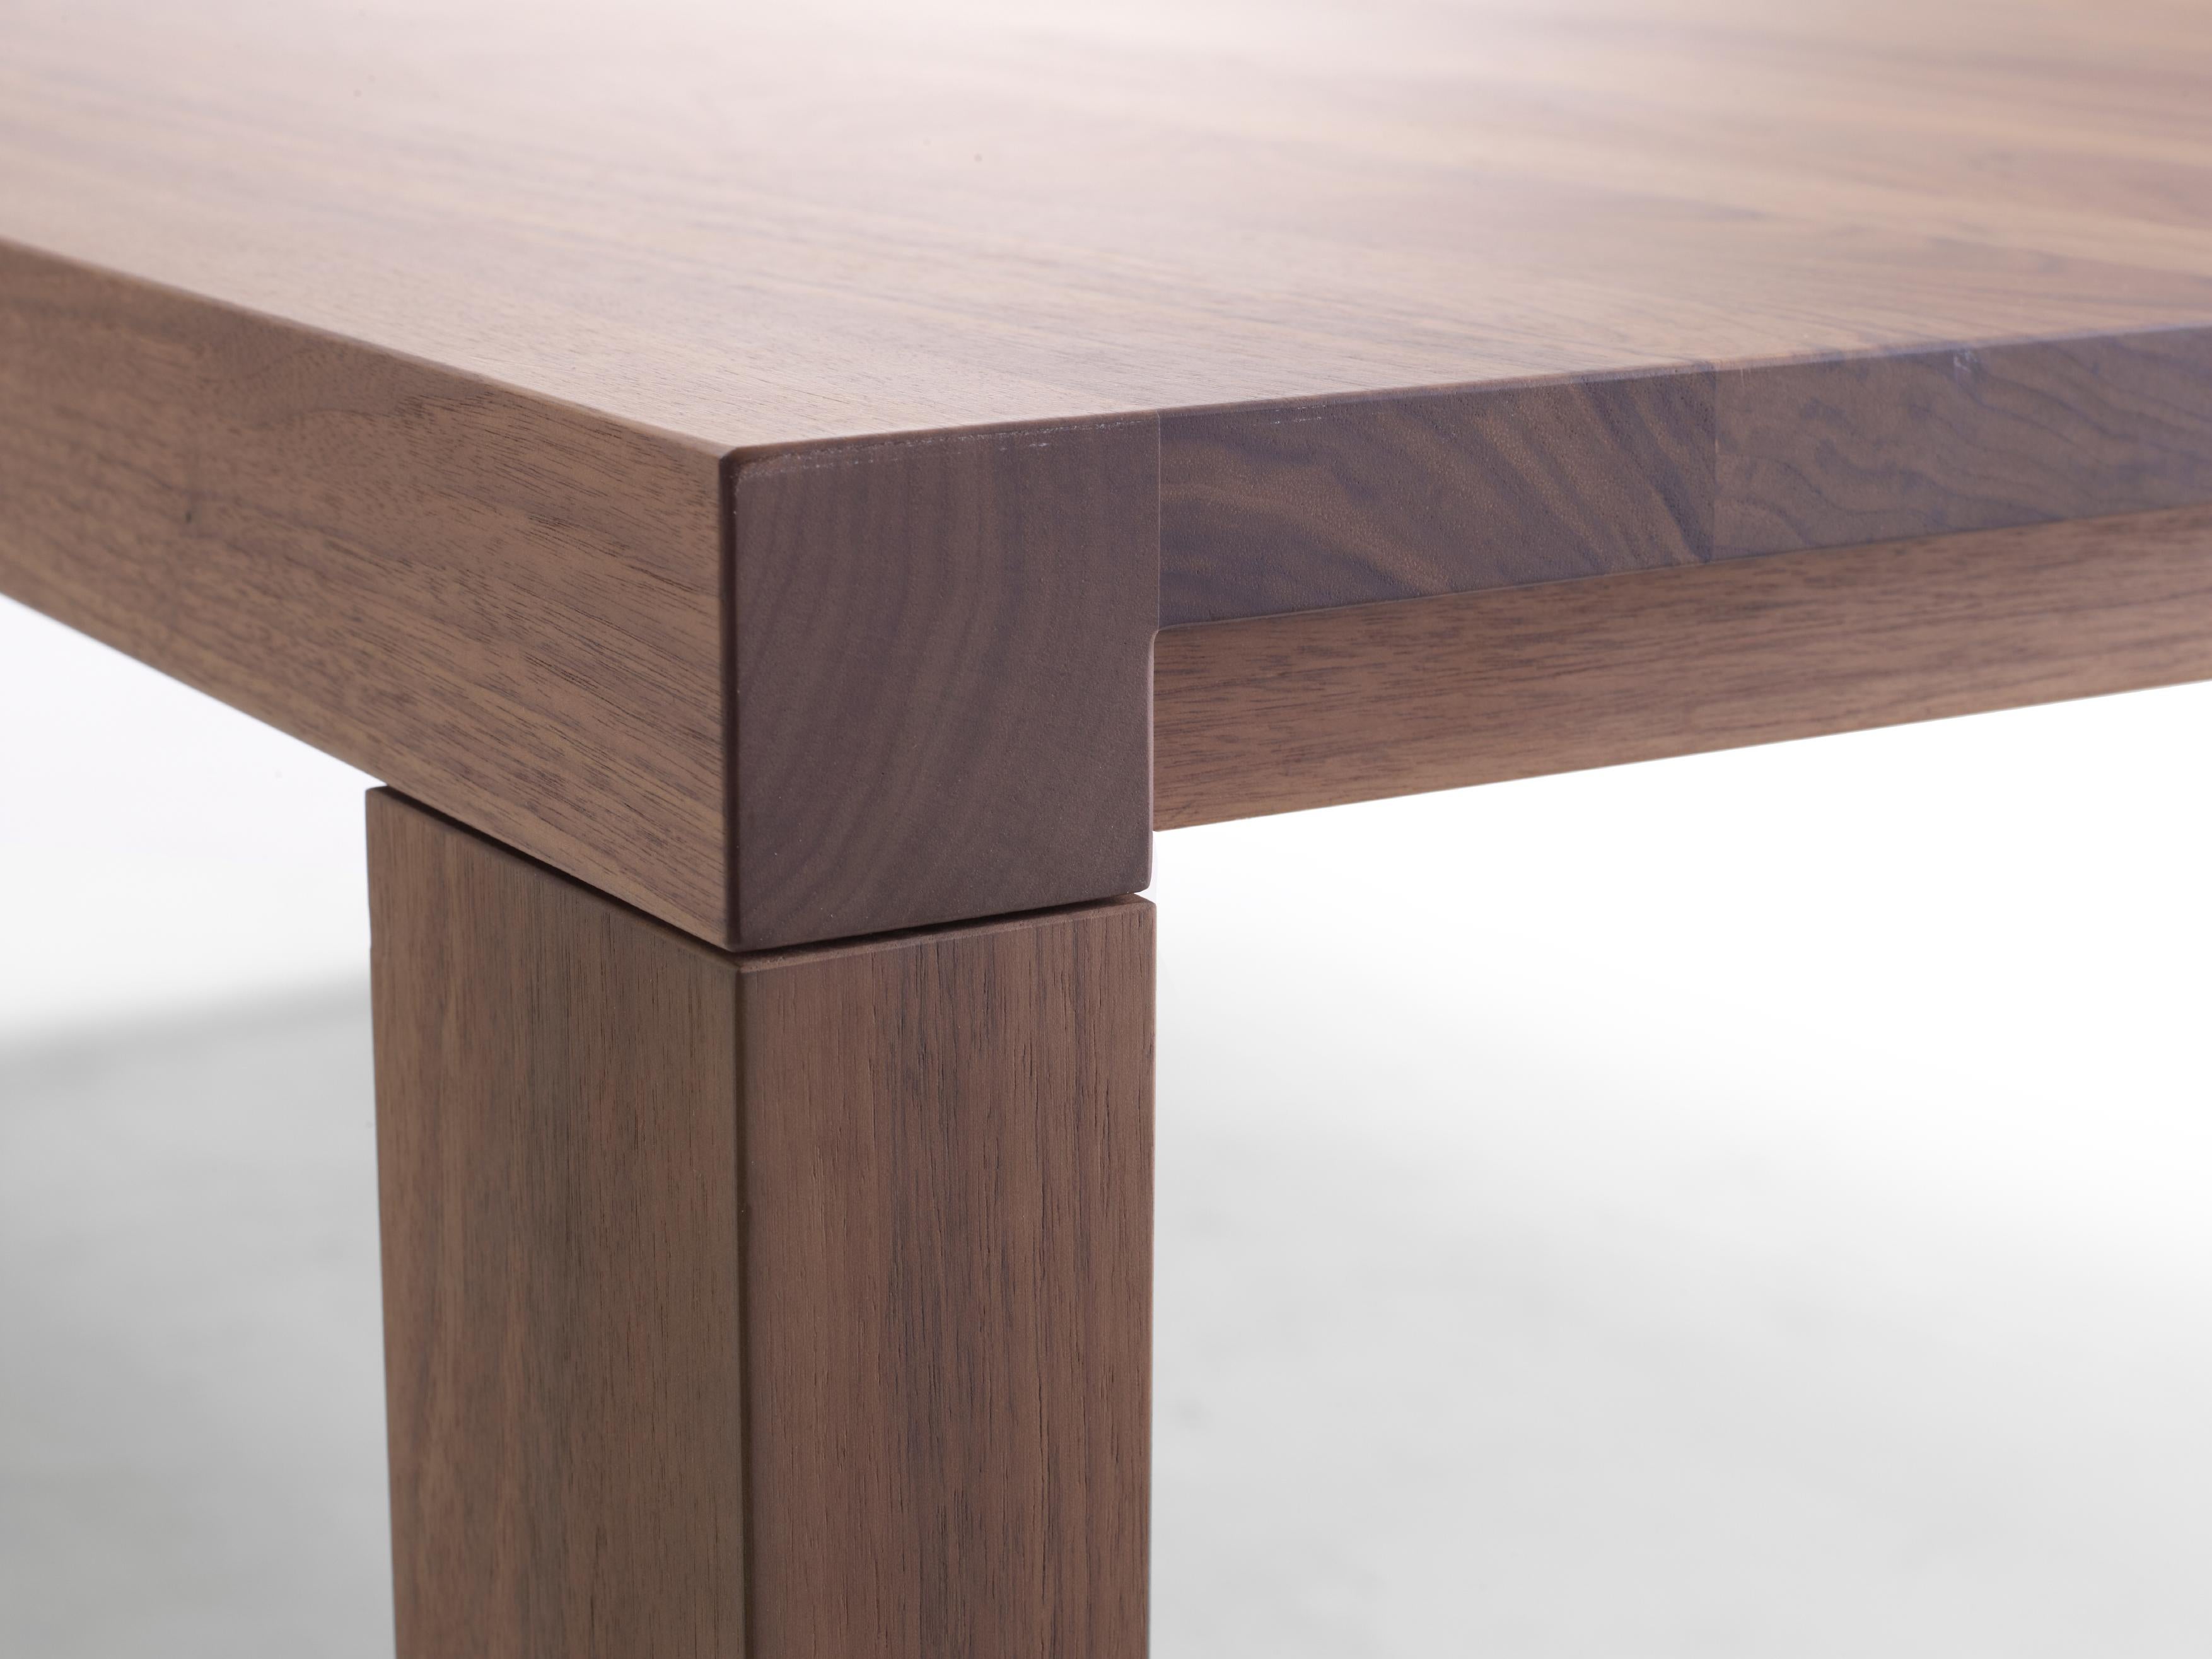 Essenza is a solid wood table with a pure and elegant design. It can also be turned into a high-end desk with a neat cable feed-through, cable management and privacy panel, and completed with a matching set of drawers from our Graphic Module range